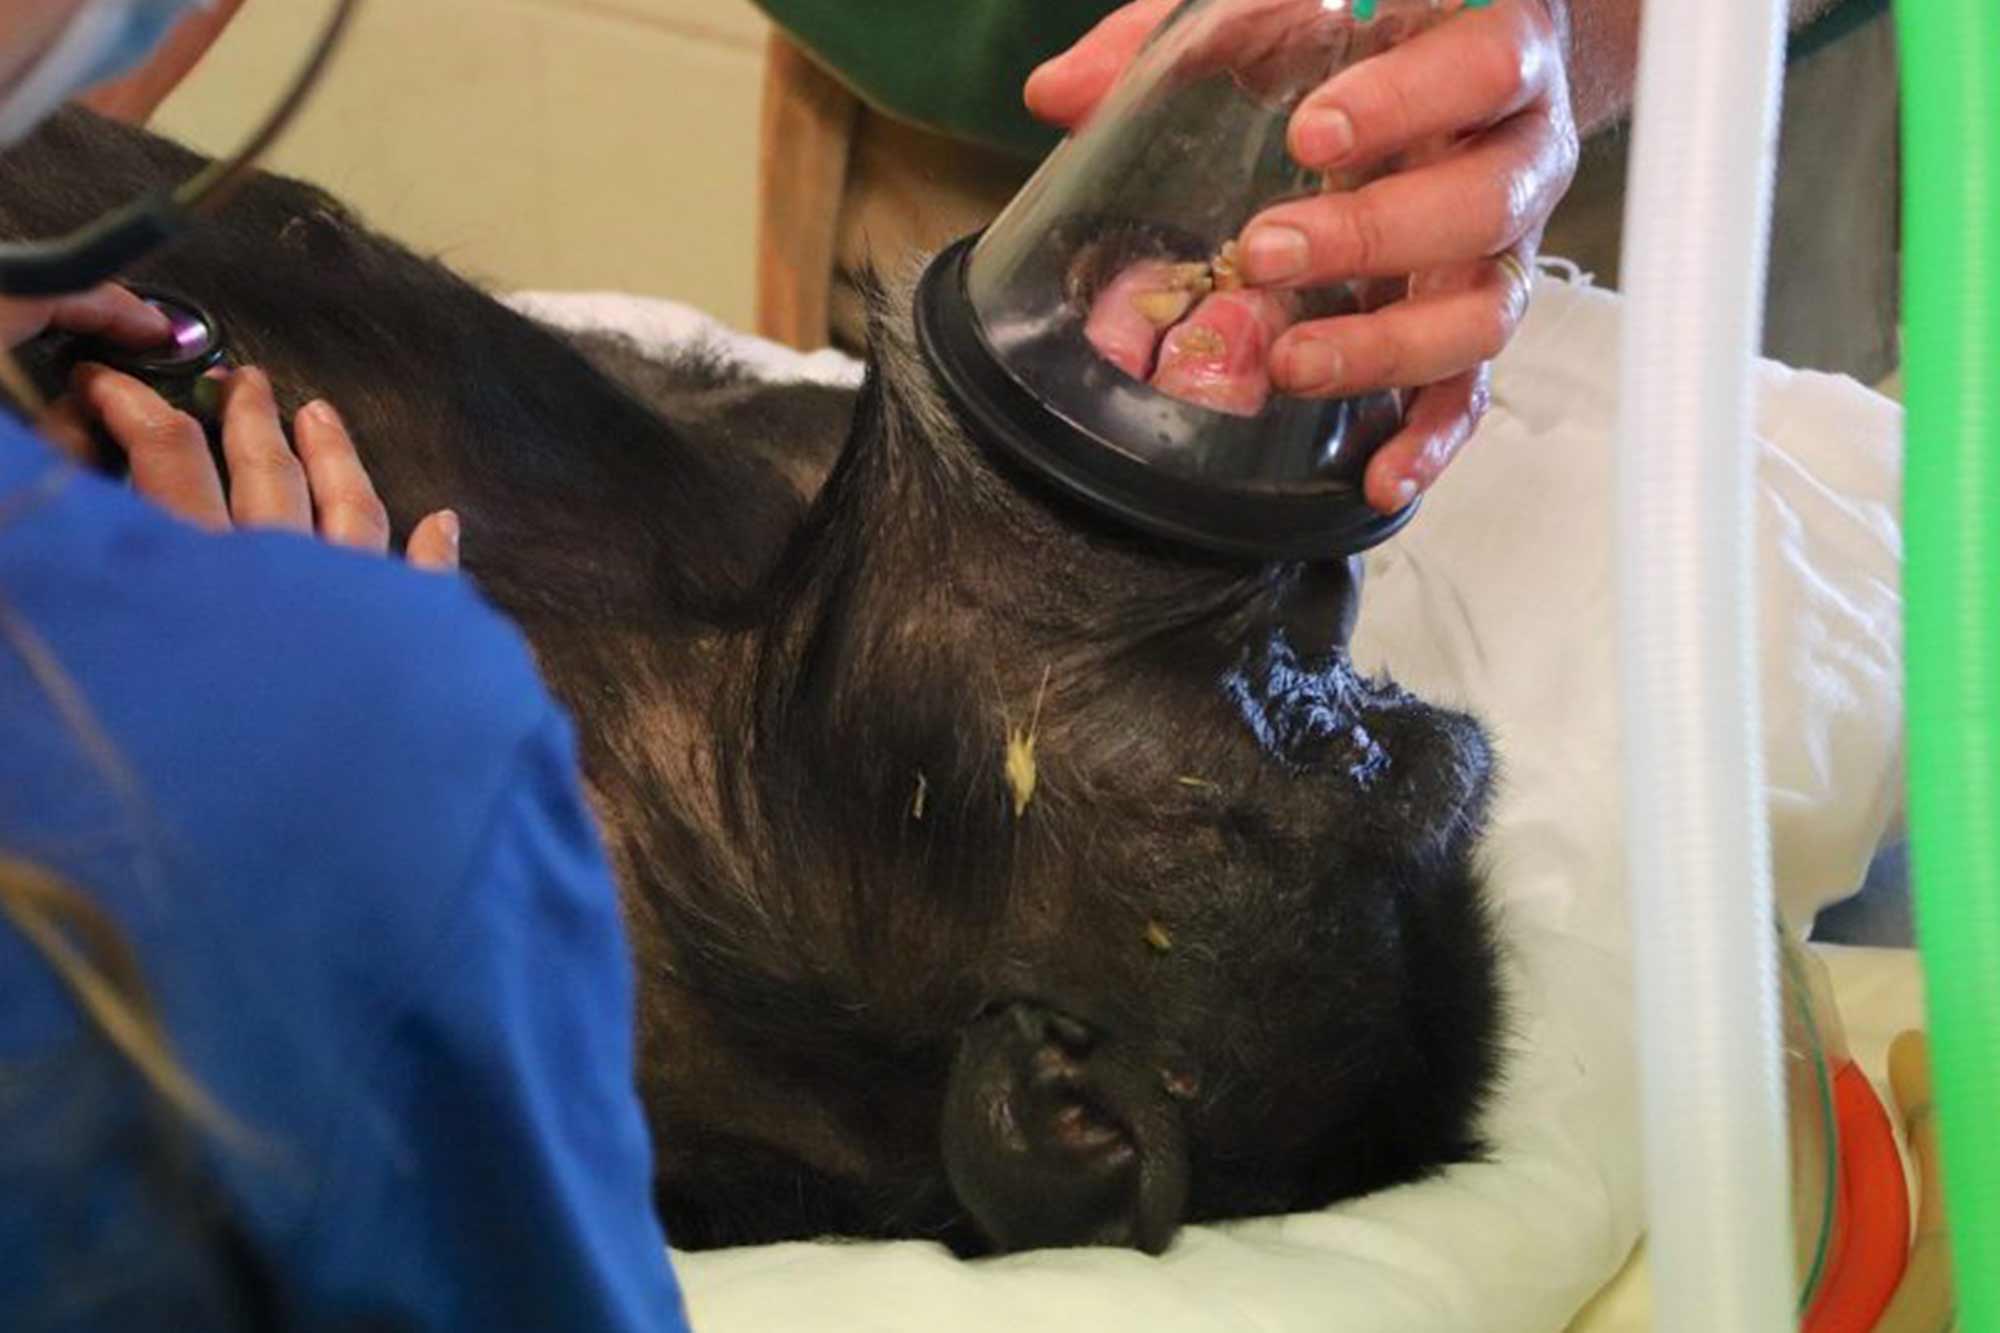 In photos – chimpanzee undergoes tooth extraction at zoo